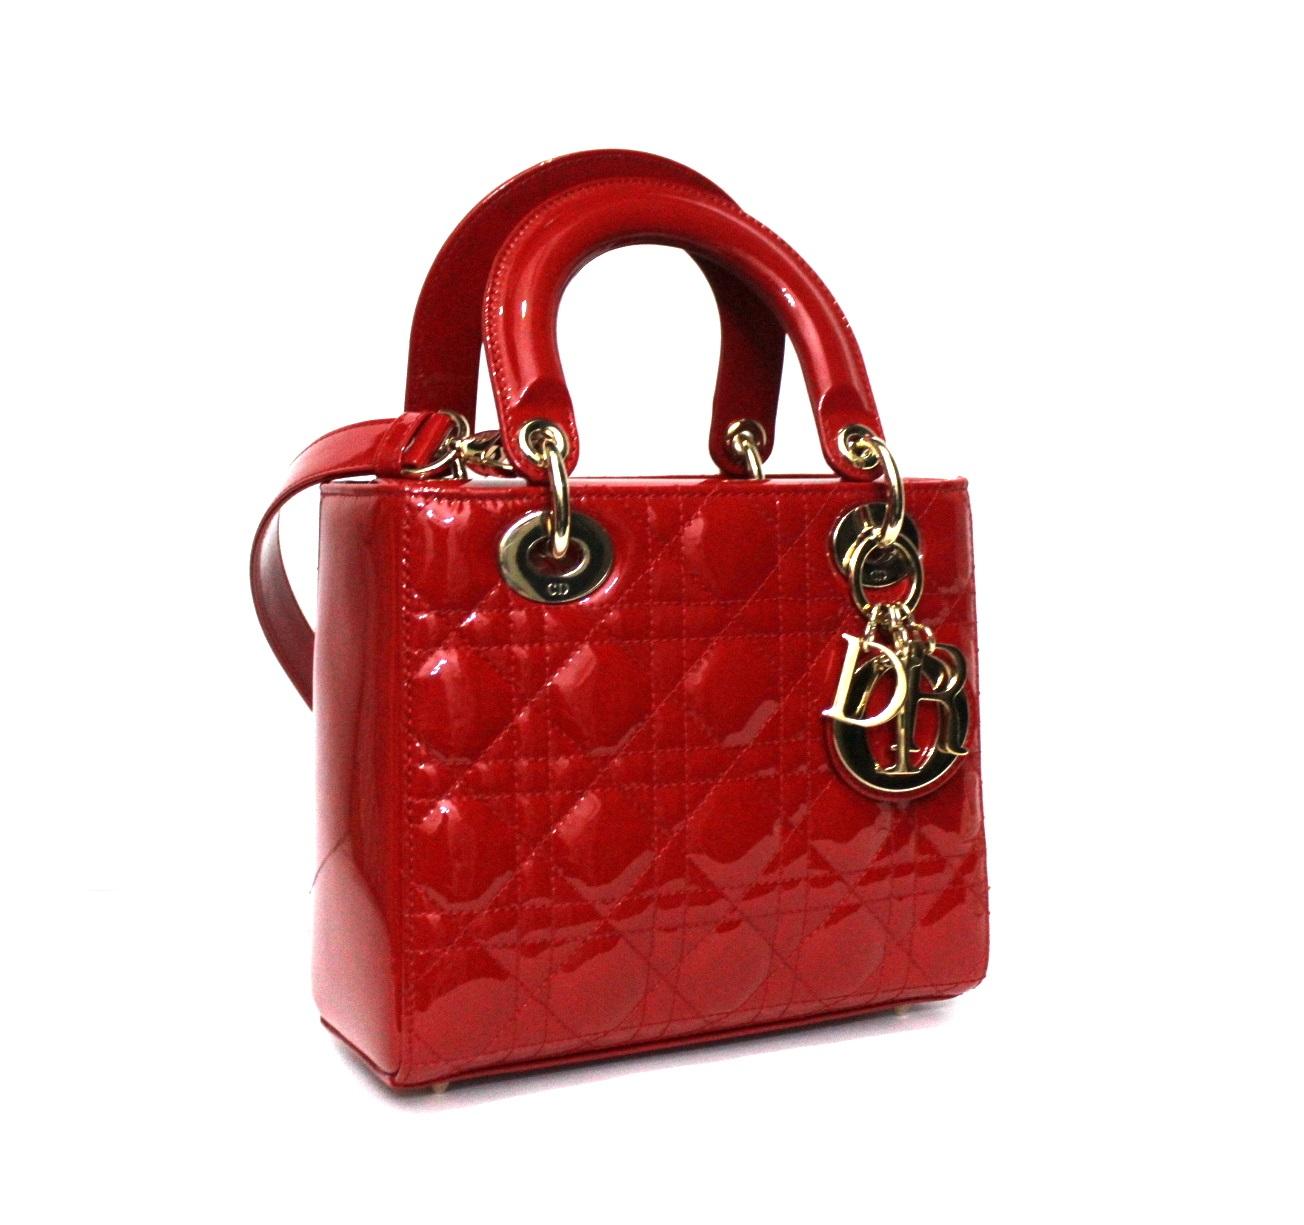 Dior designer bag crafted in red patent leather with gold hardware.
Equipped with double leather handle and removable shoulder strap.
Closure with interlocking flap, internally quite roomy.
It seems in perfect conditions.